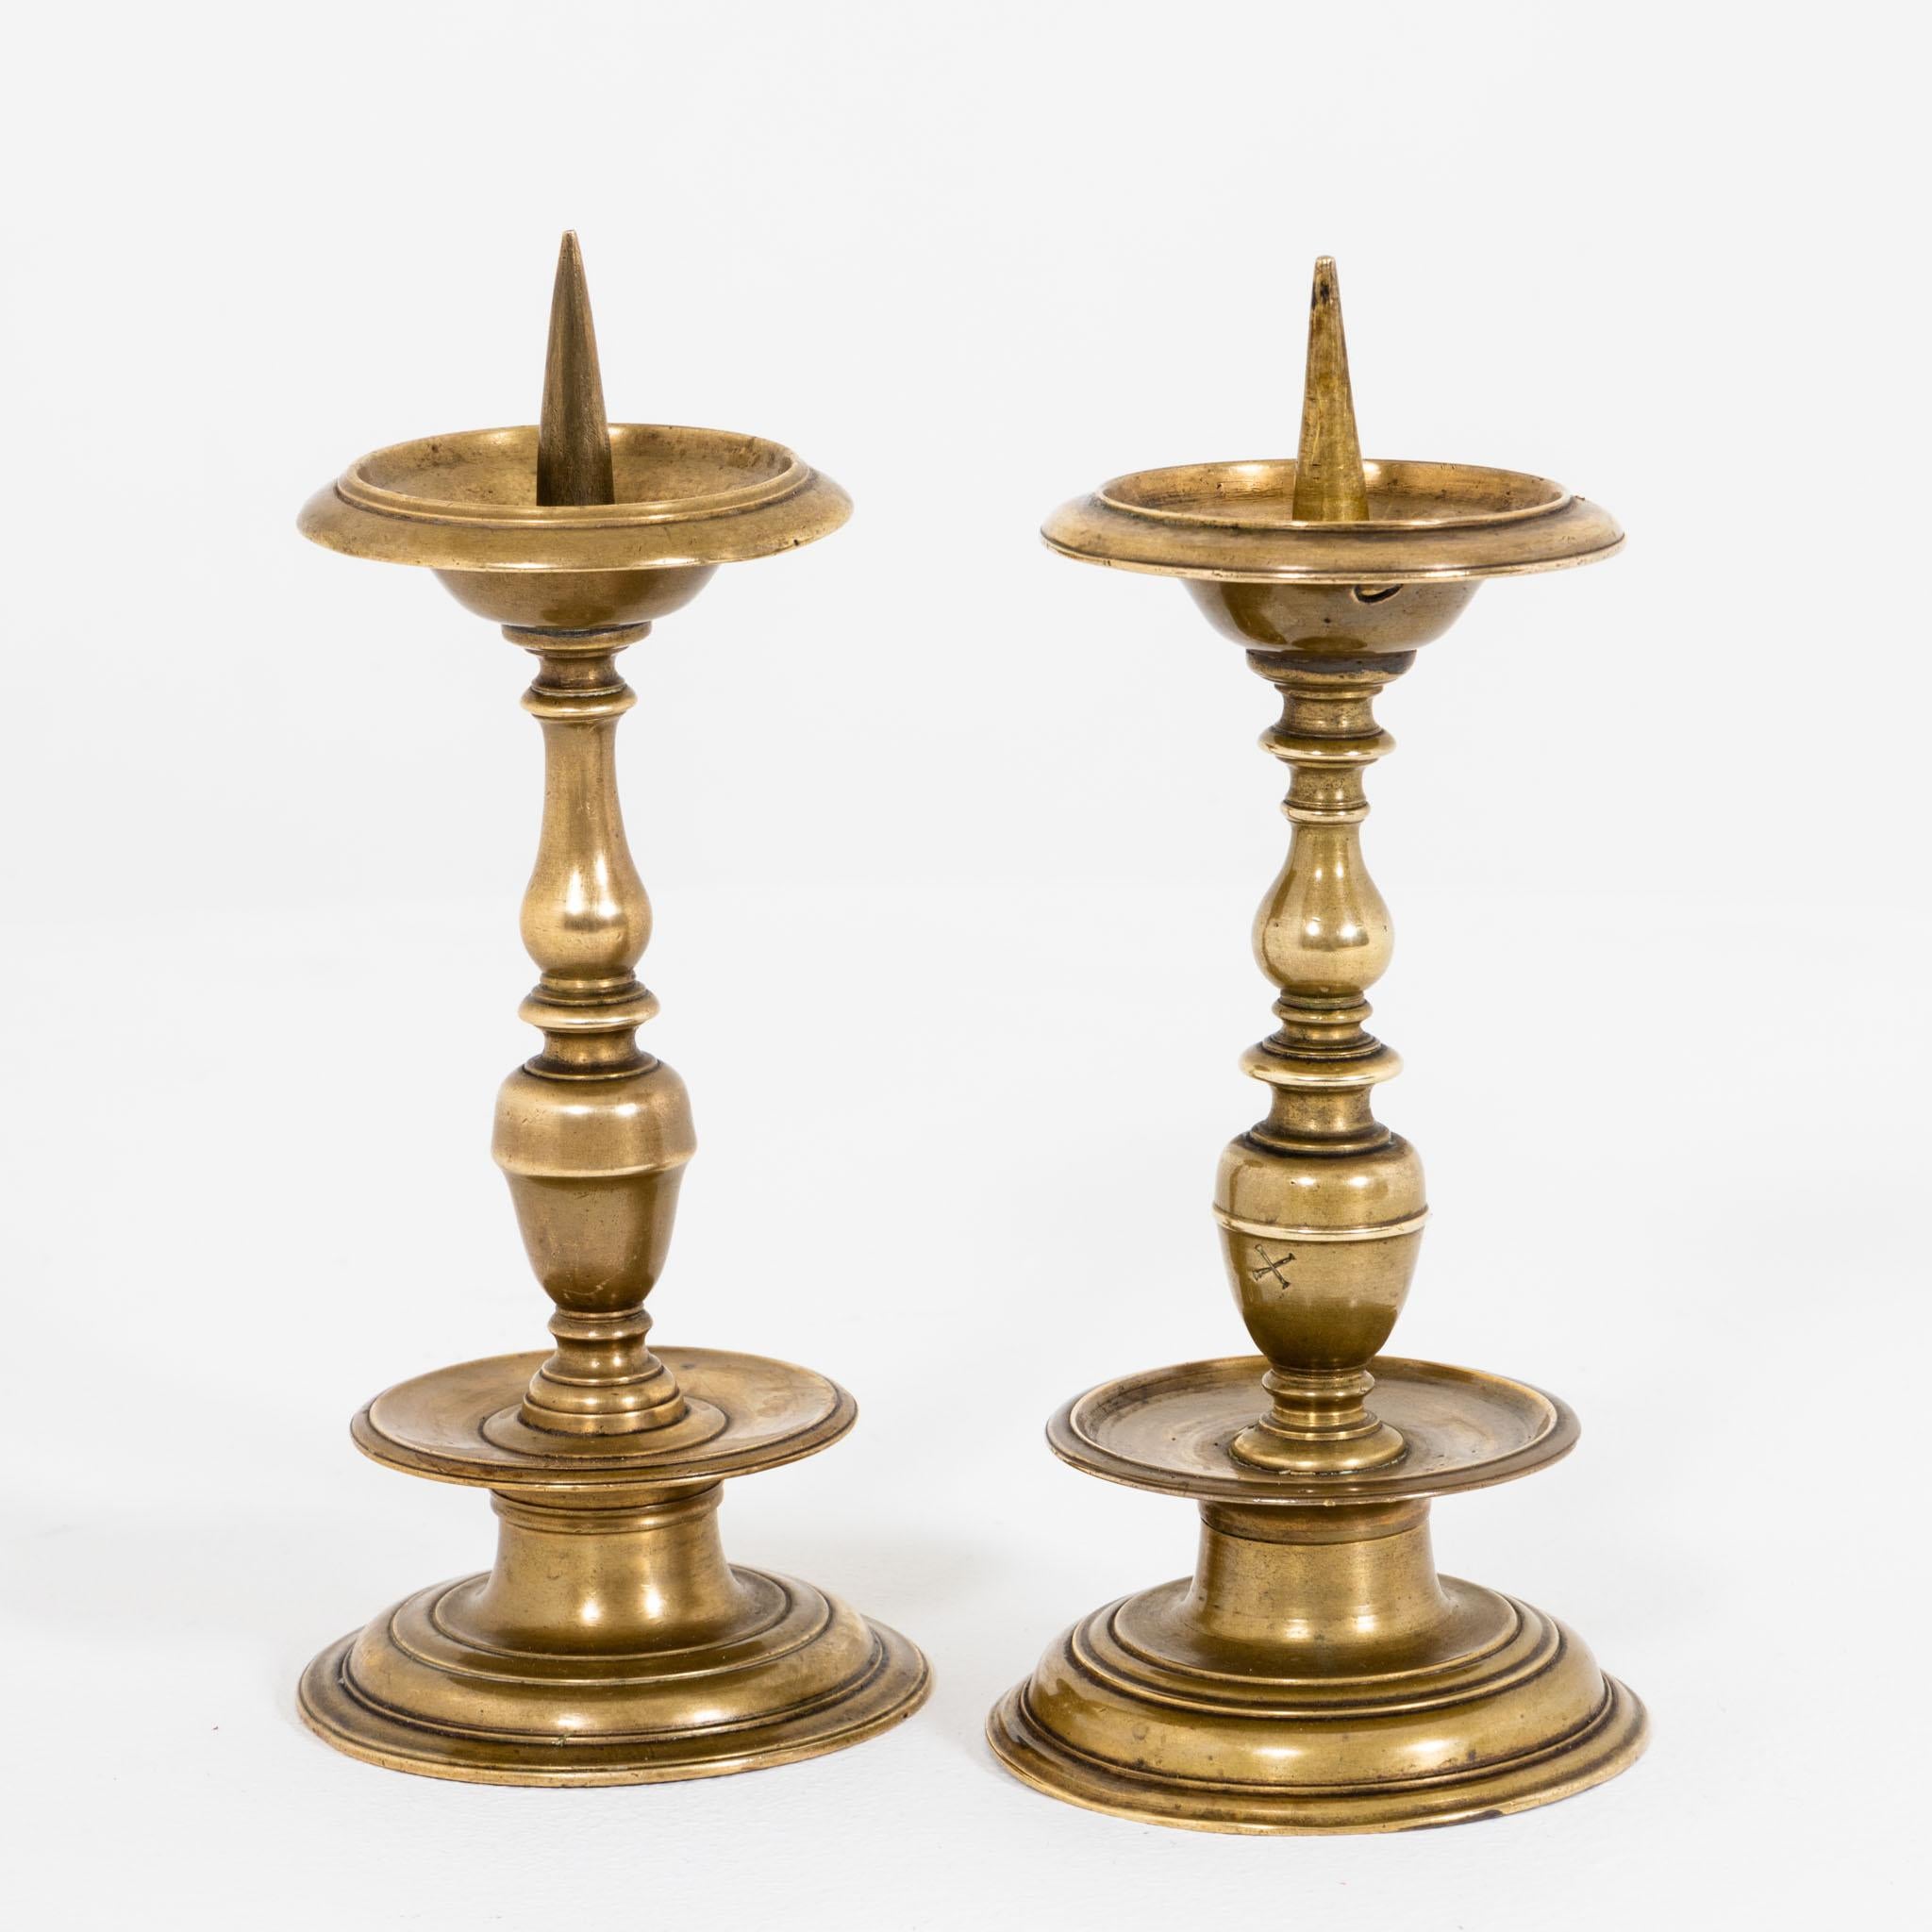 Two brass candlesticks with balustraded shafts and drip trays with spikes. The candlesticks are not identical in their design, but complement each other decoratively to form a harmonious ensemble. One with a small hole on the drip tray and X marking.